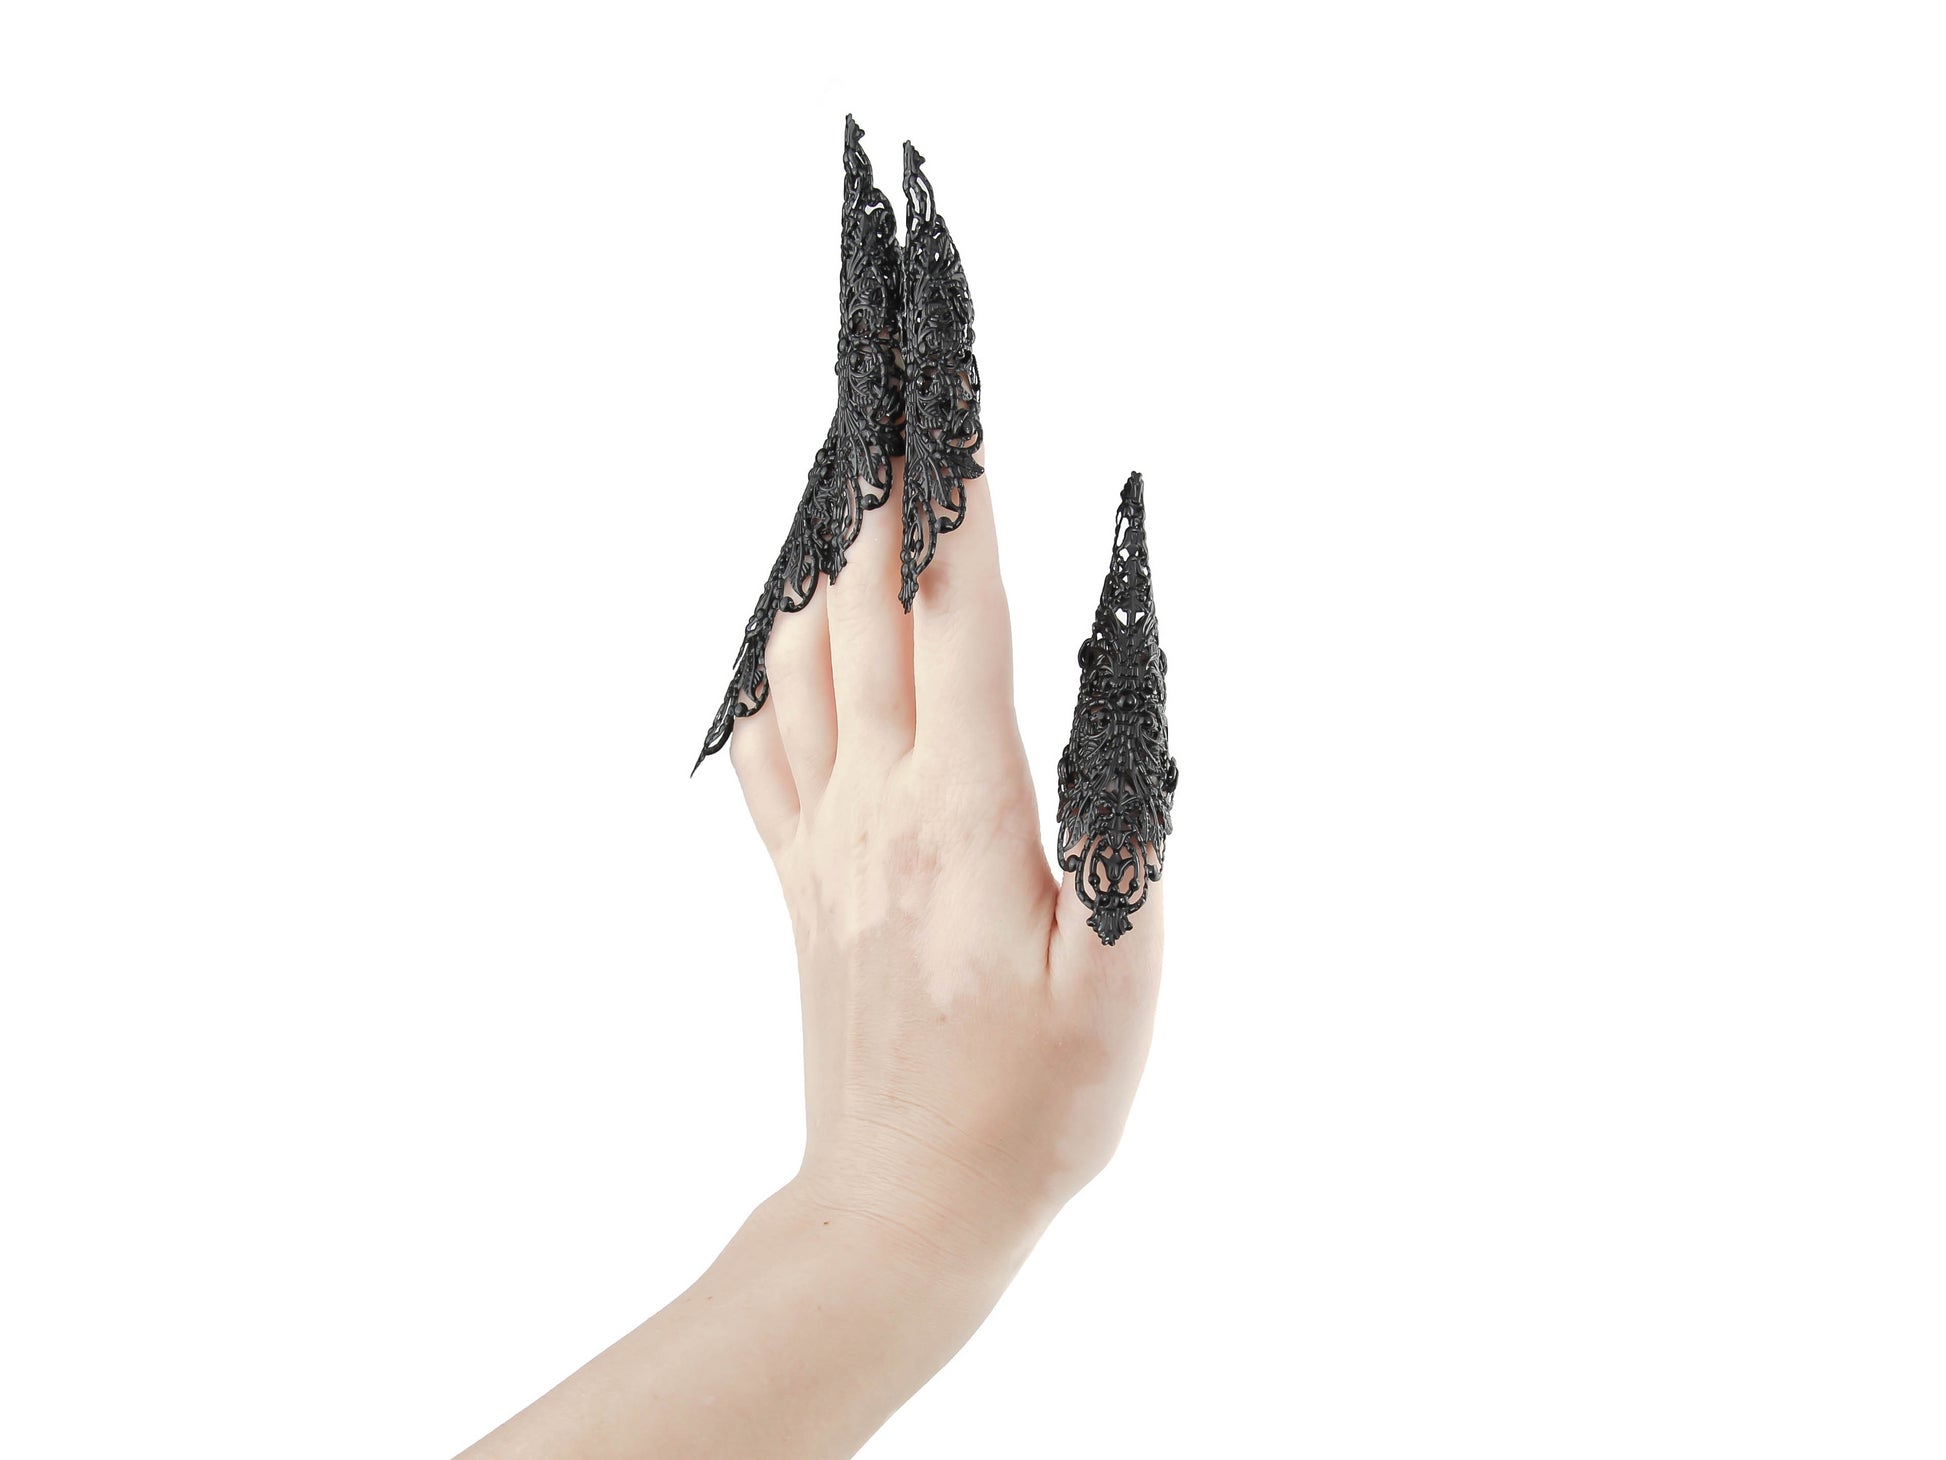 Captivating full hand set of Myril Jewels' extra long black nail claw rings showcased on a delicate hand. These neo-gothic claws are perfect for a dramatic goth-chic look, making a bold statement for Halloween, enhancing a rave party outfit, or as a memorable gift for the goth girlfriend with a love for dark avant-garde fashion.